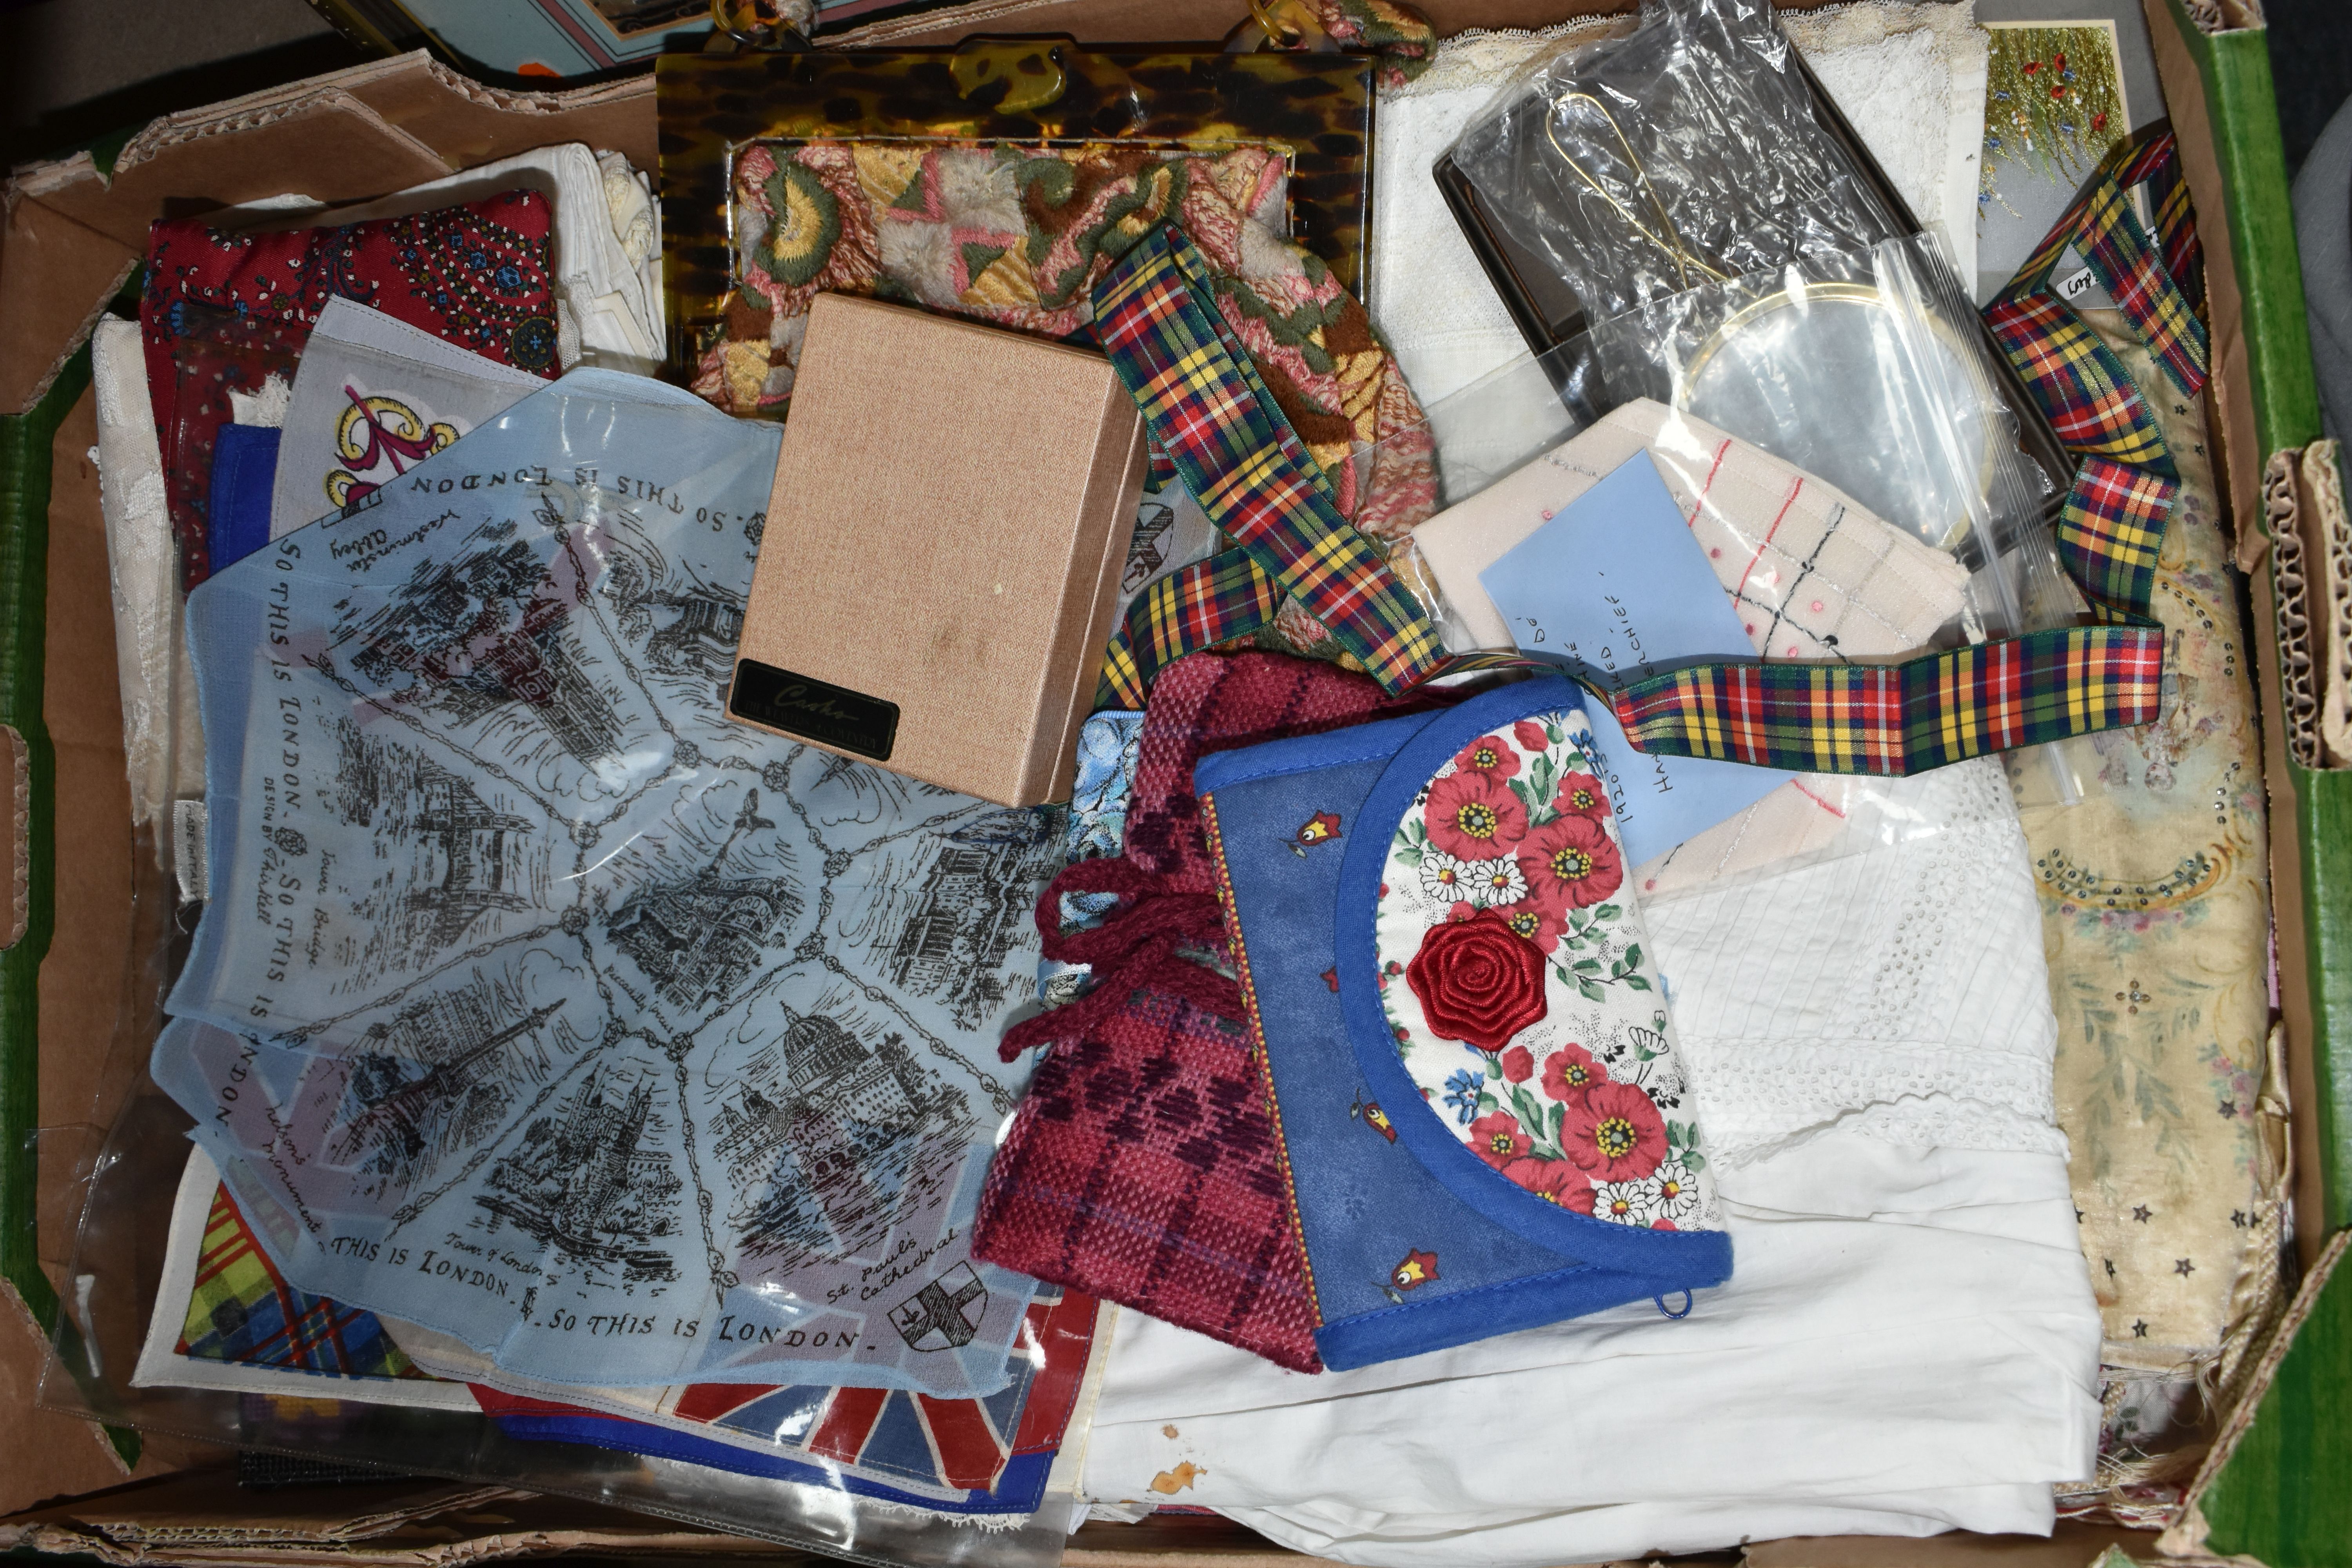 ONE BOX OF VINTAGE HANDKERCHIEFS, EMBROIDERY KITS, AND SNAKE SKIN HANDBAGS, with a large - Image 4 of 6